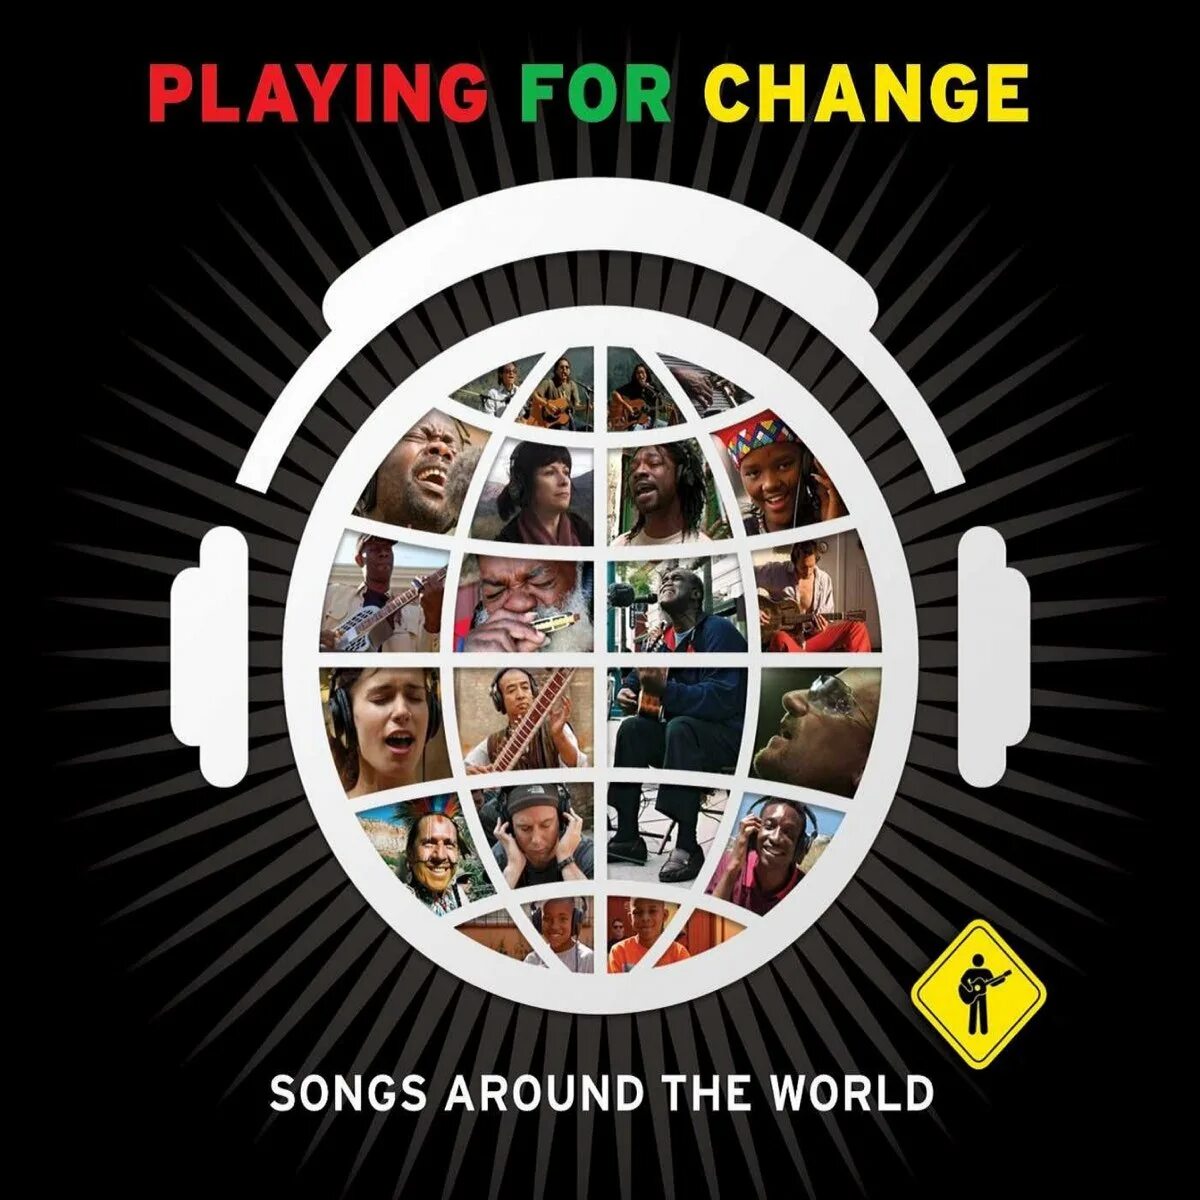 Playing for change. Playing for change Song around the World. Playing for change Band. Around the World around the World песня. Песня around me